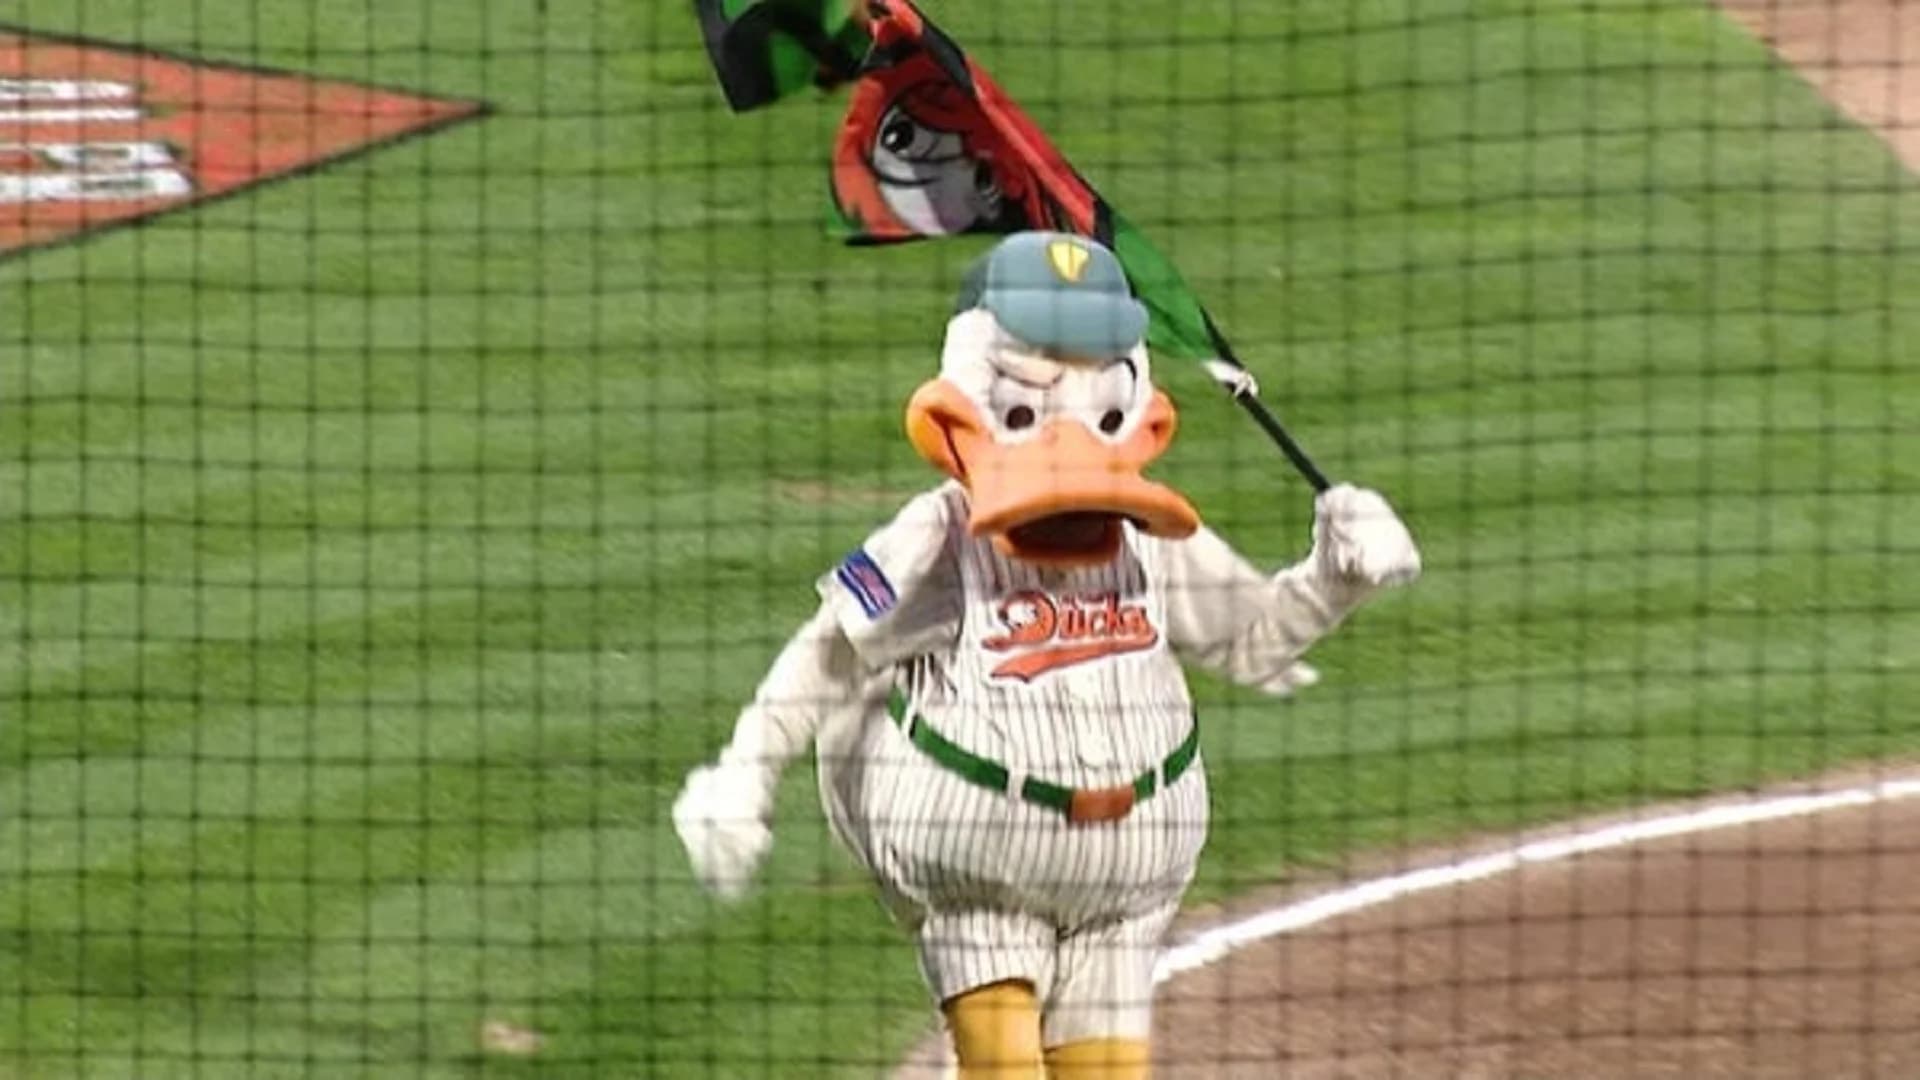 Long Island Ducks kick off season Friday for the first time since 2019